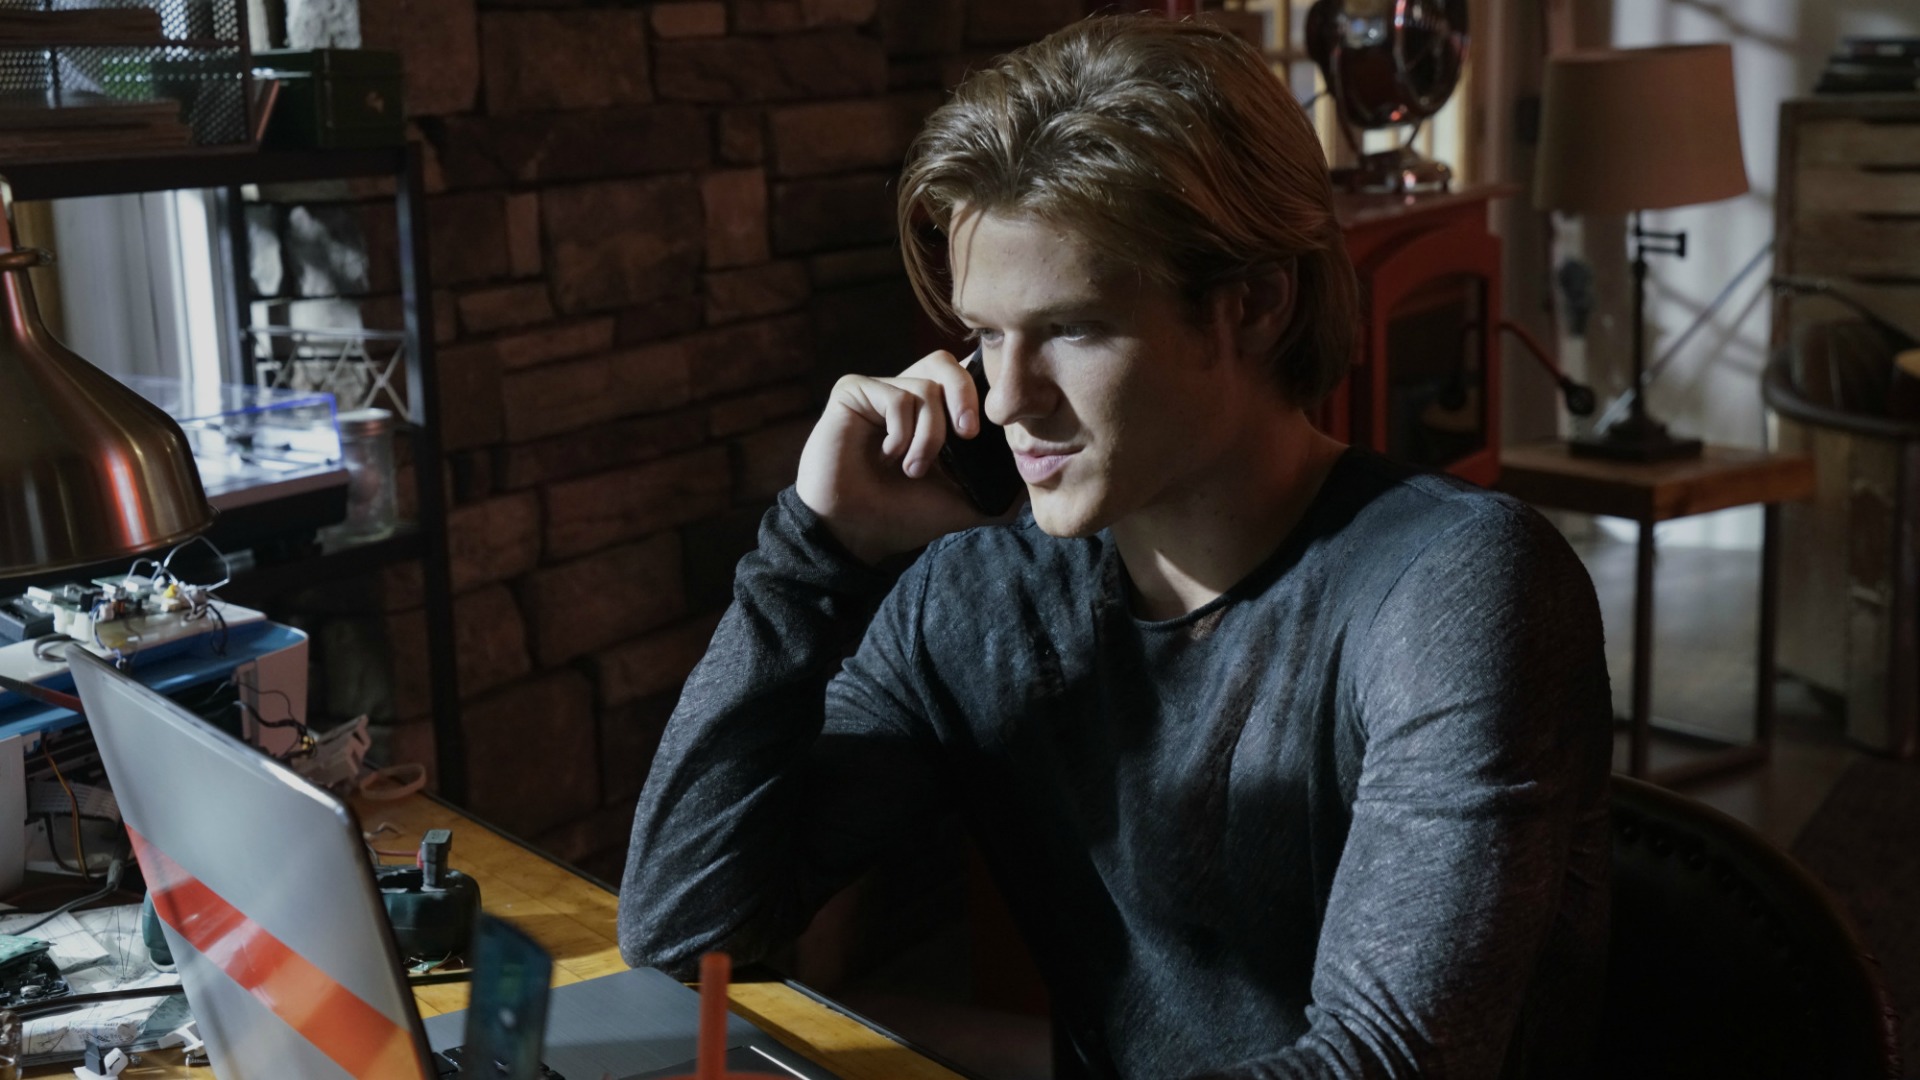 MacGyver looks into something troubling online.